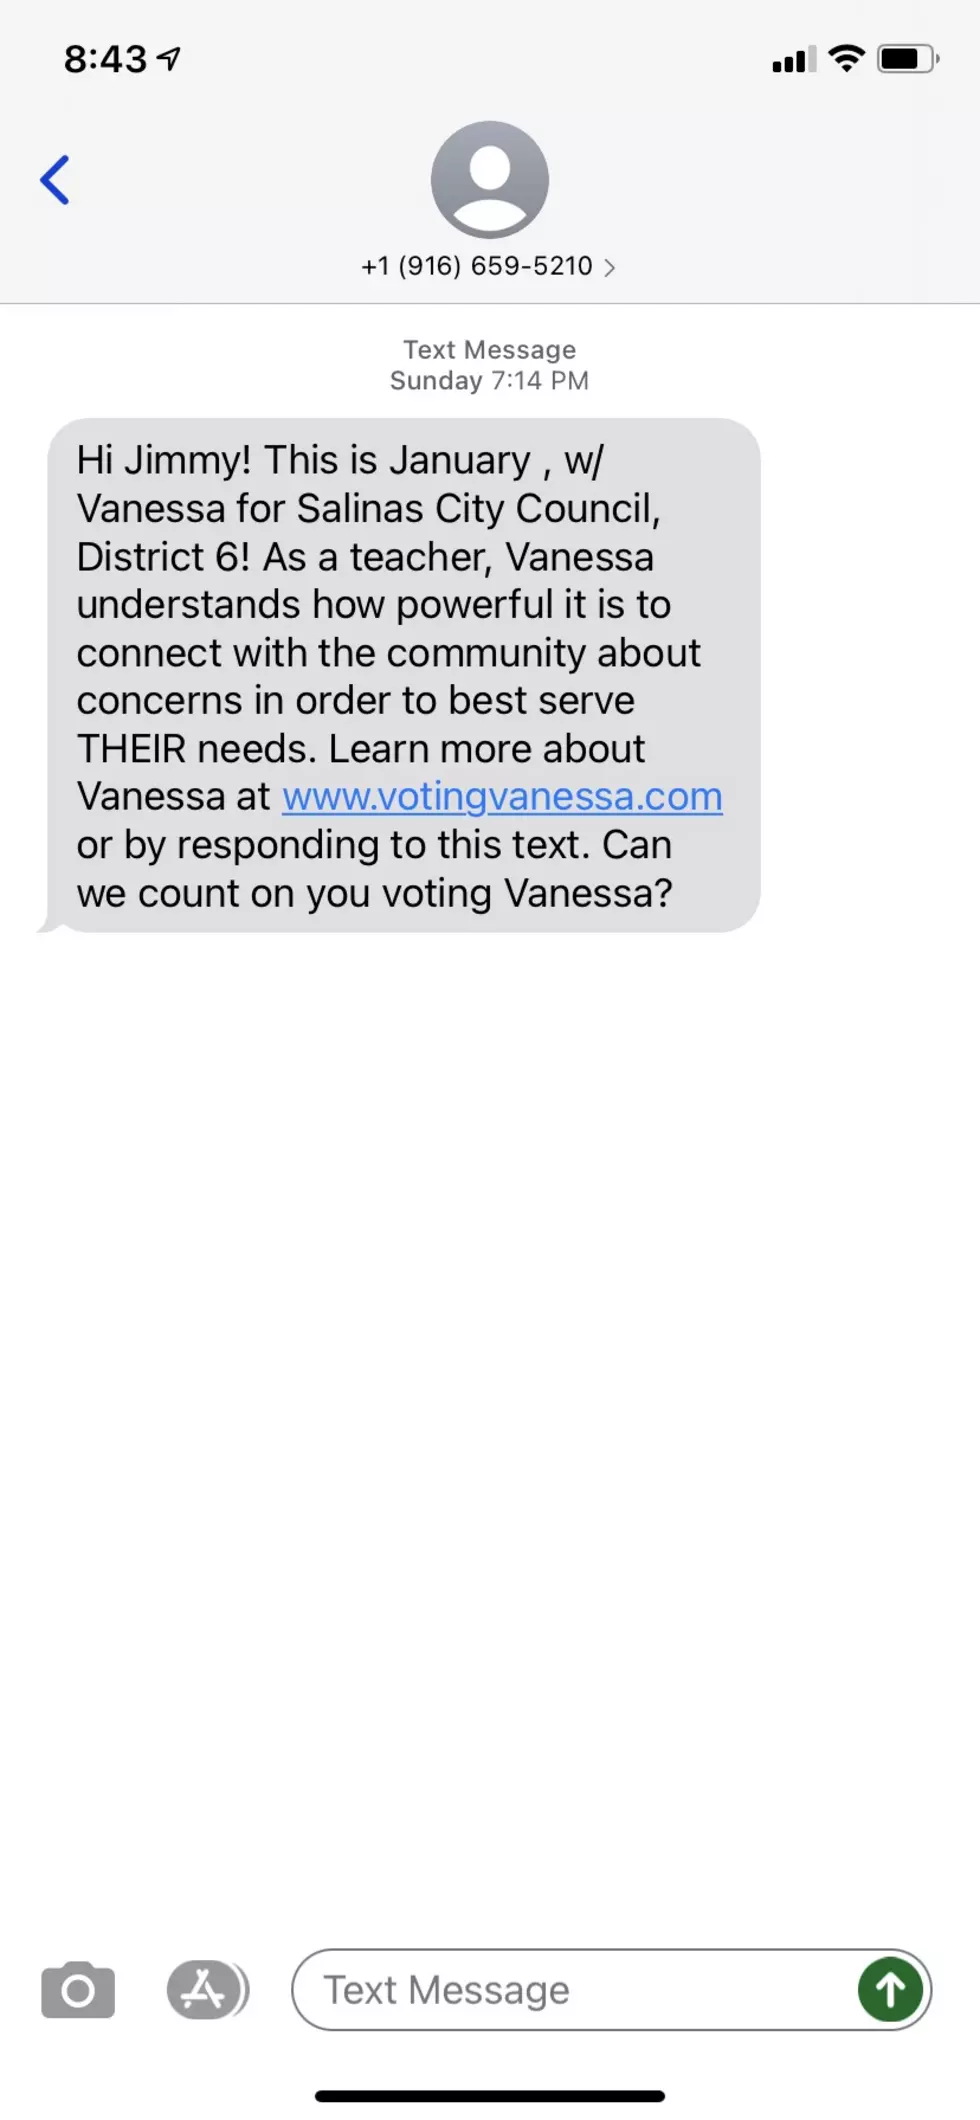 Are You Getting All These Campaign Texts? I Am. Here’s What’s Up